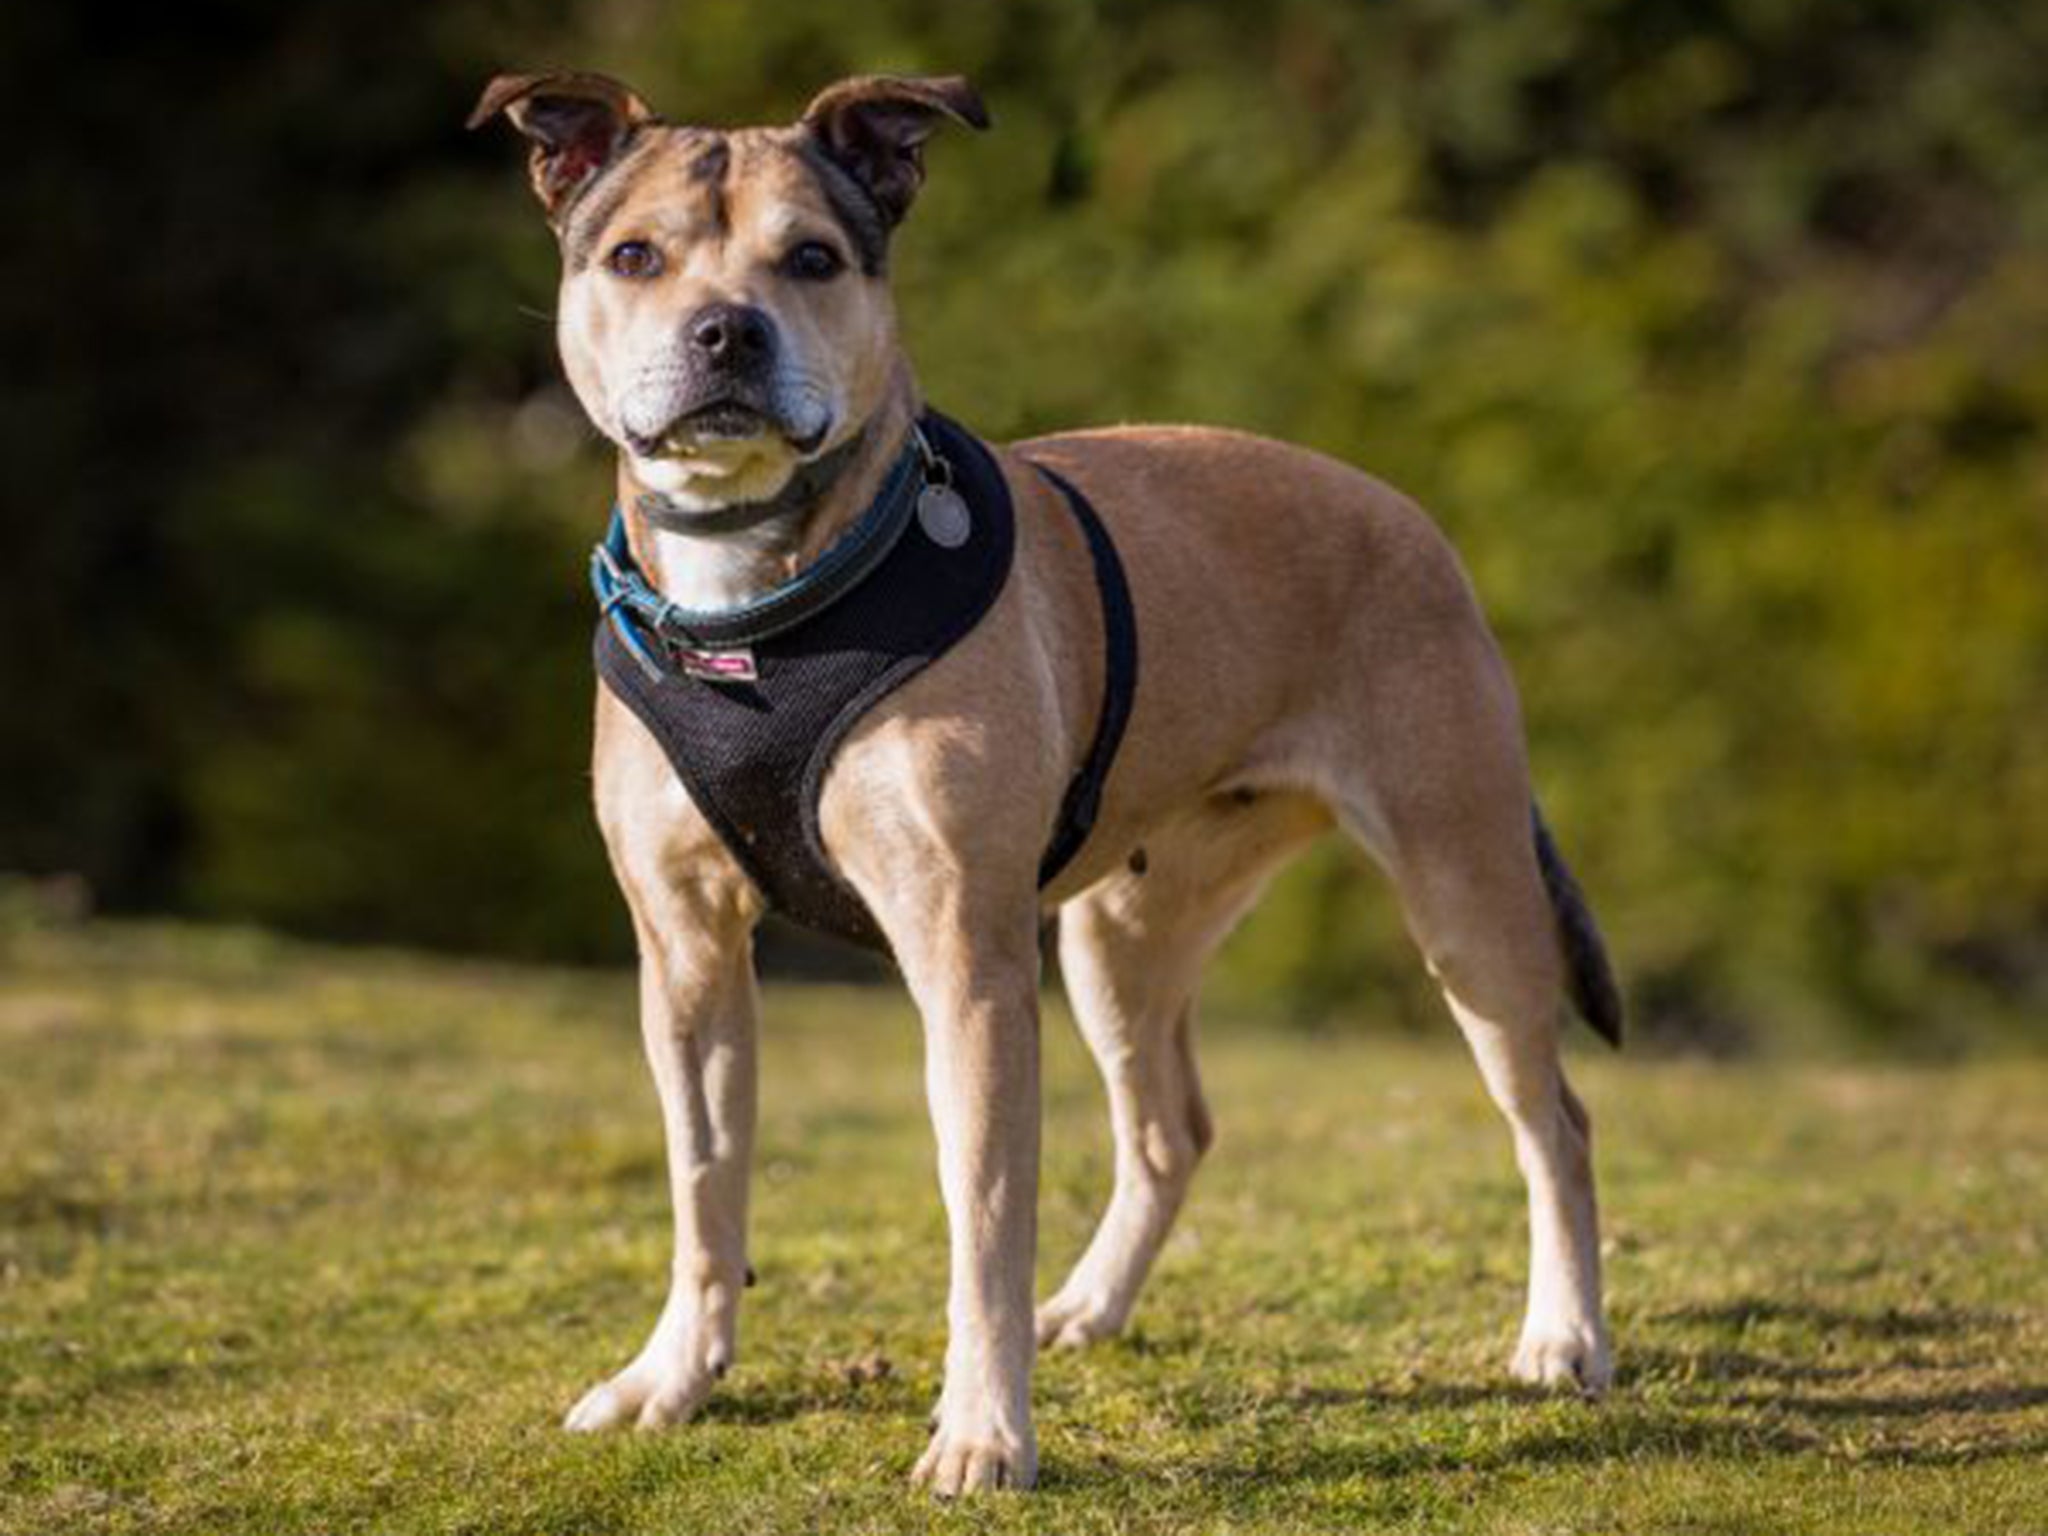 Staffordshire bull terrier crossbreed, 'Ellie', WLTM owners living in a fun, active home